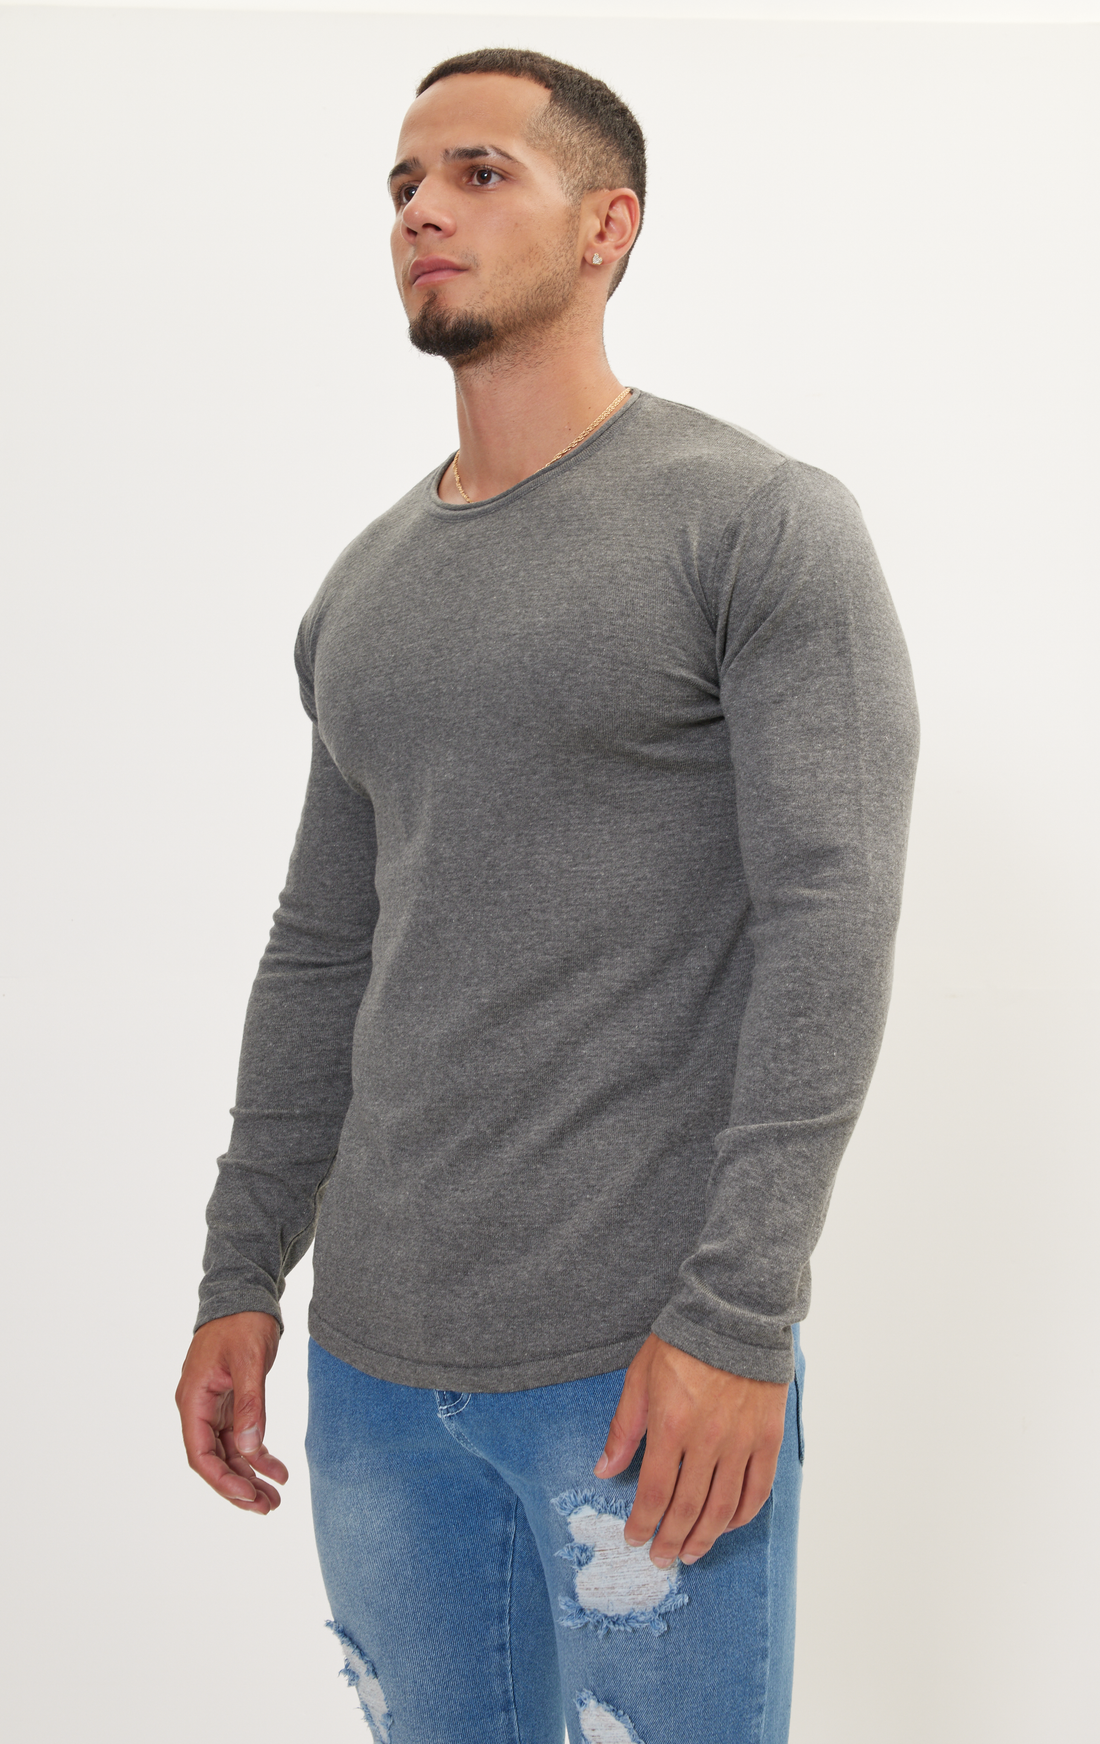 N° 6430 ANTHRACITE SWEATER